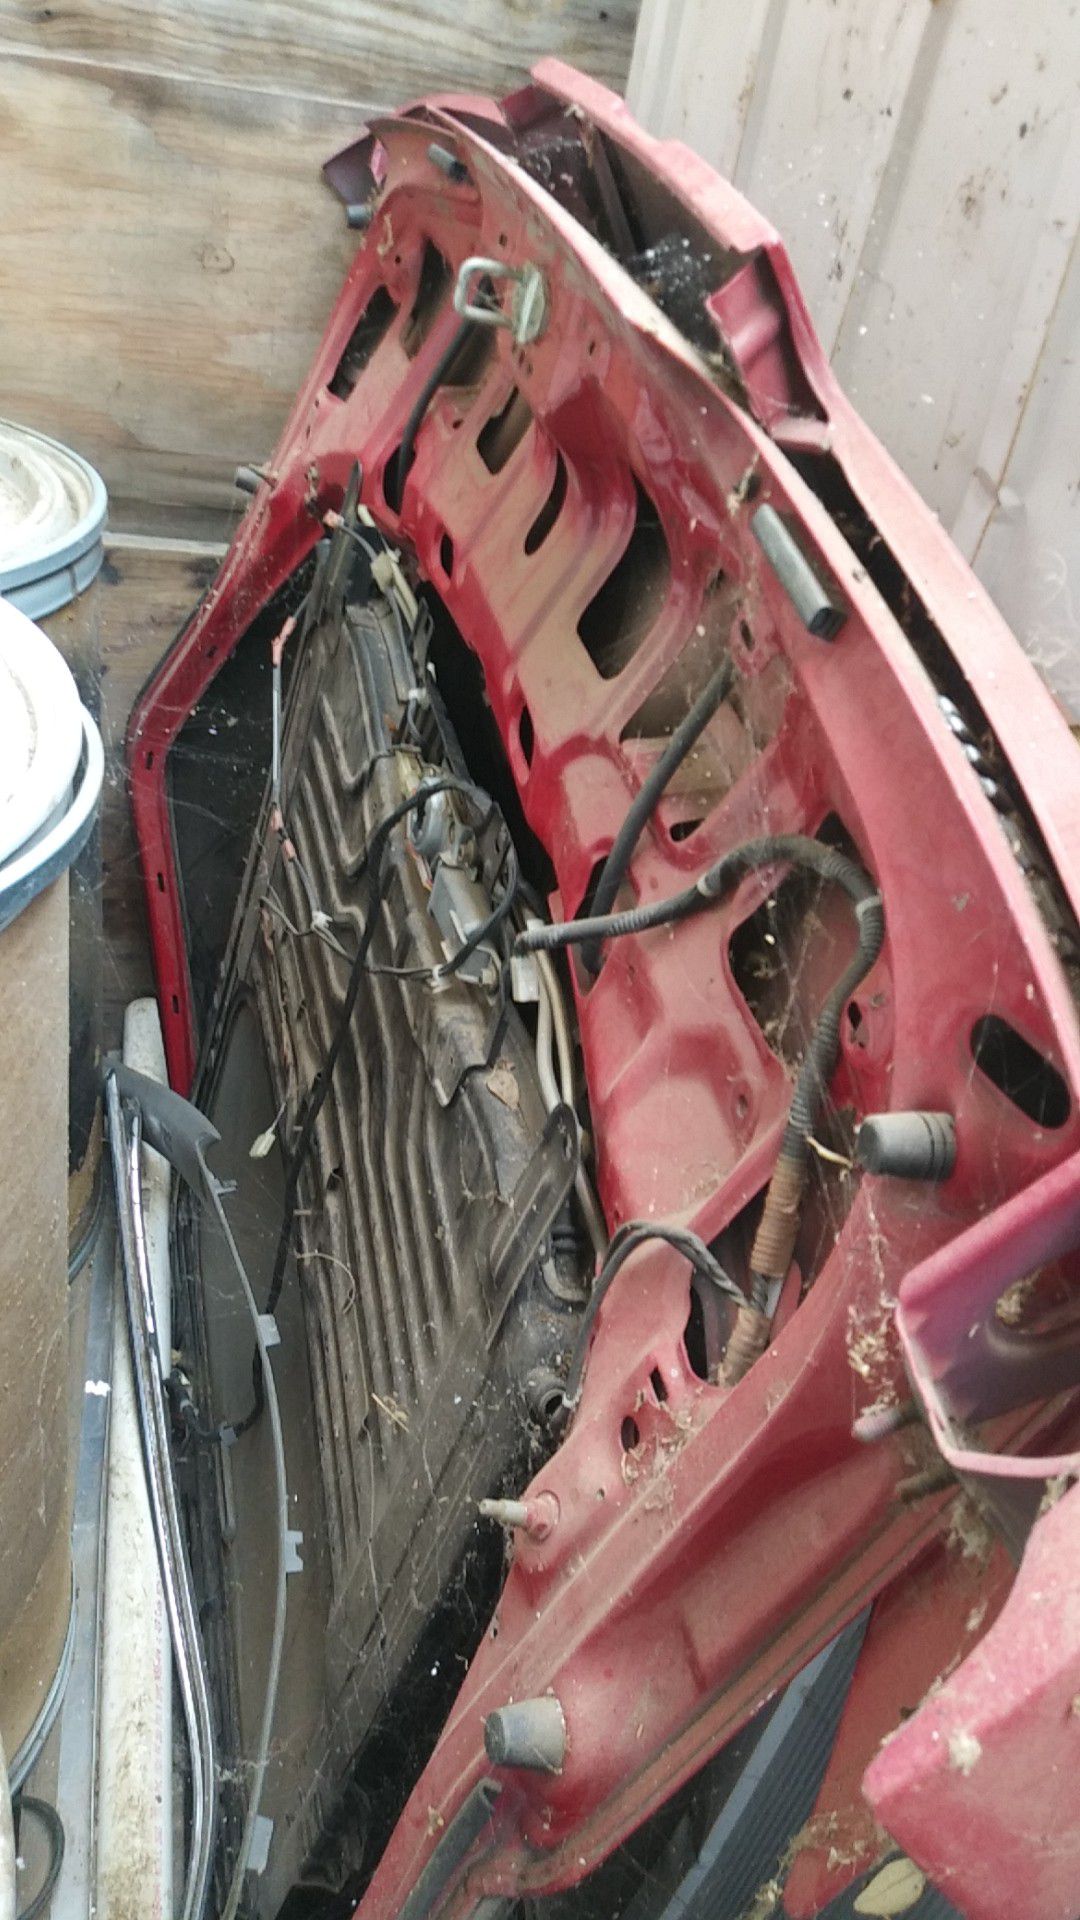 Free acura integra rear hatch and parts!